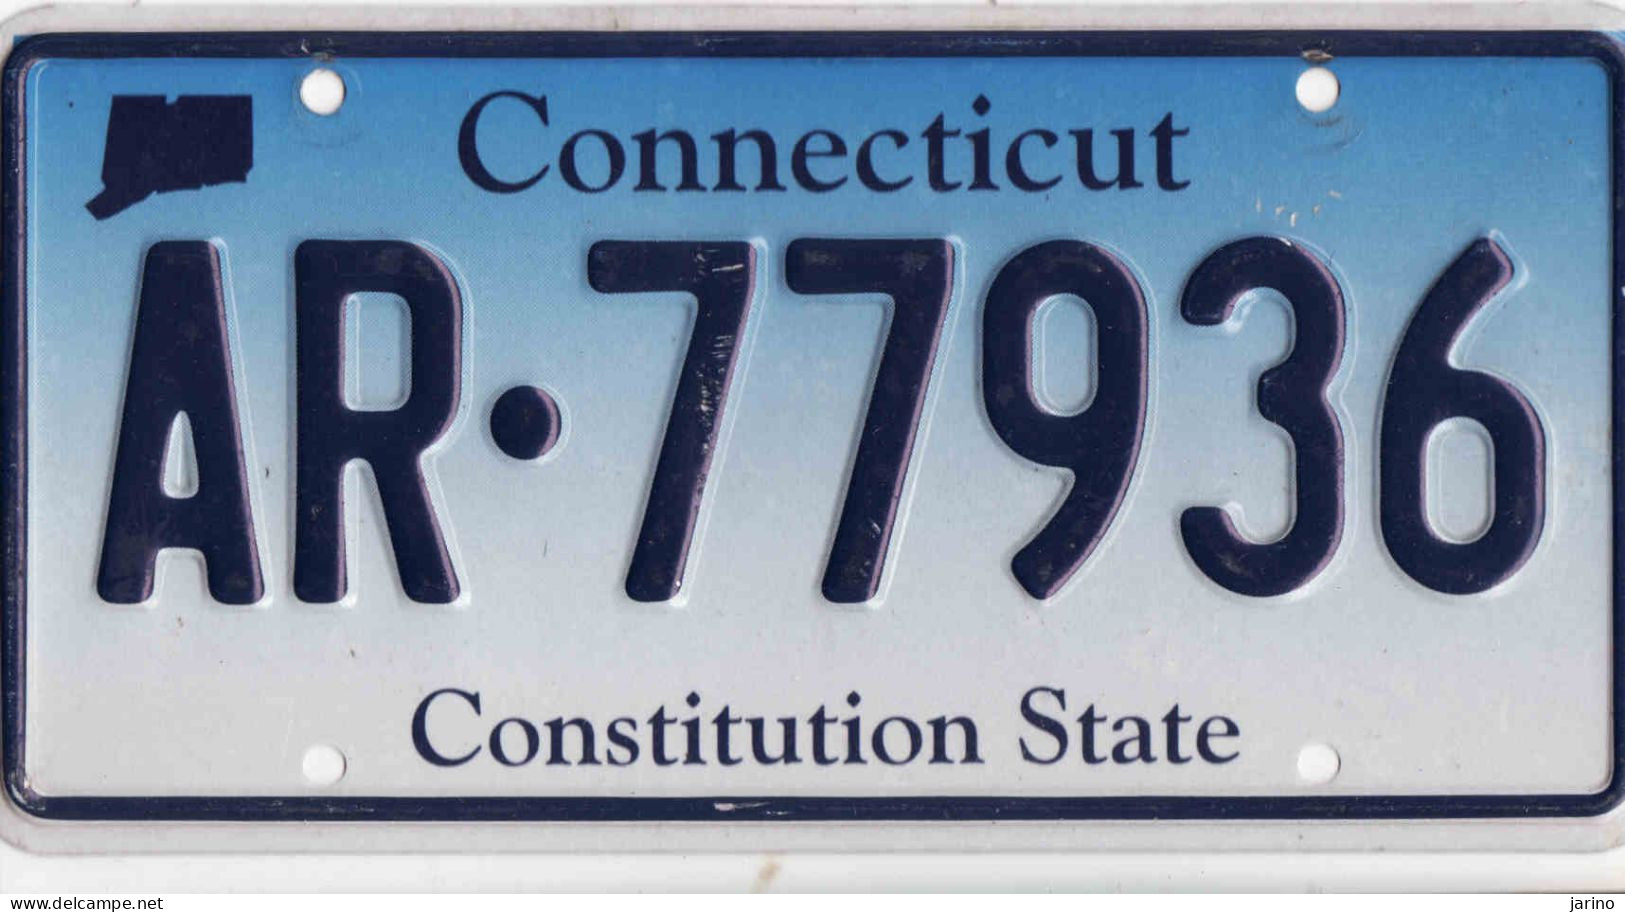 Plaque D' Immatriculation USA - State Connecticut, USA License Plate - State Connecticut, 30,5 X 15 Cm, Fine Condition - Number Plates